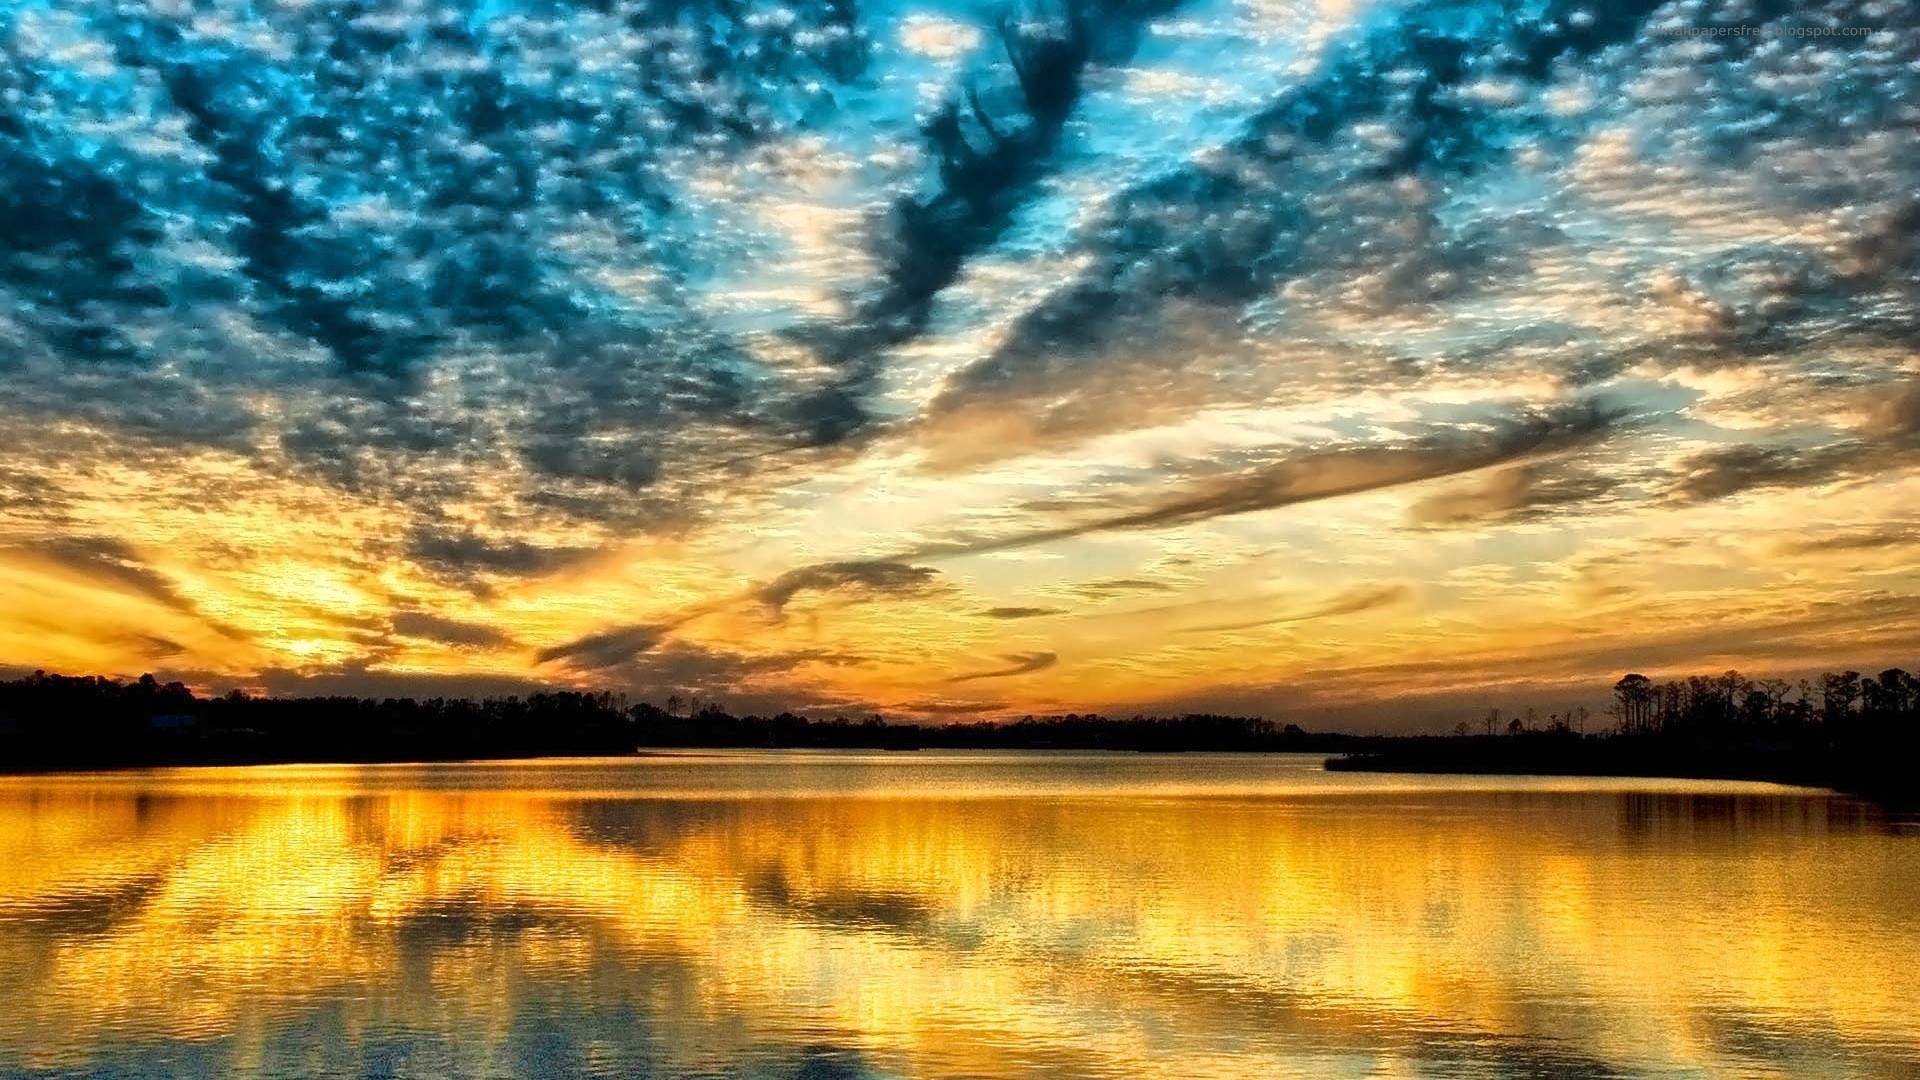 General 1920x1080 sunset skyscape sky orange sky nature sunlight calm waters water outdoors reflection clouds